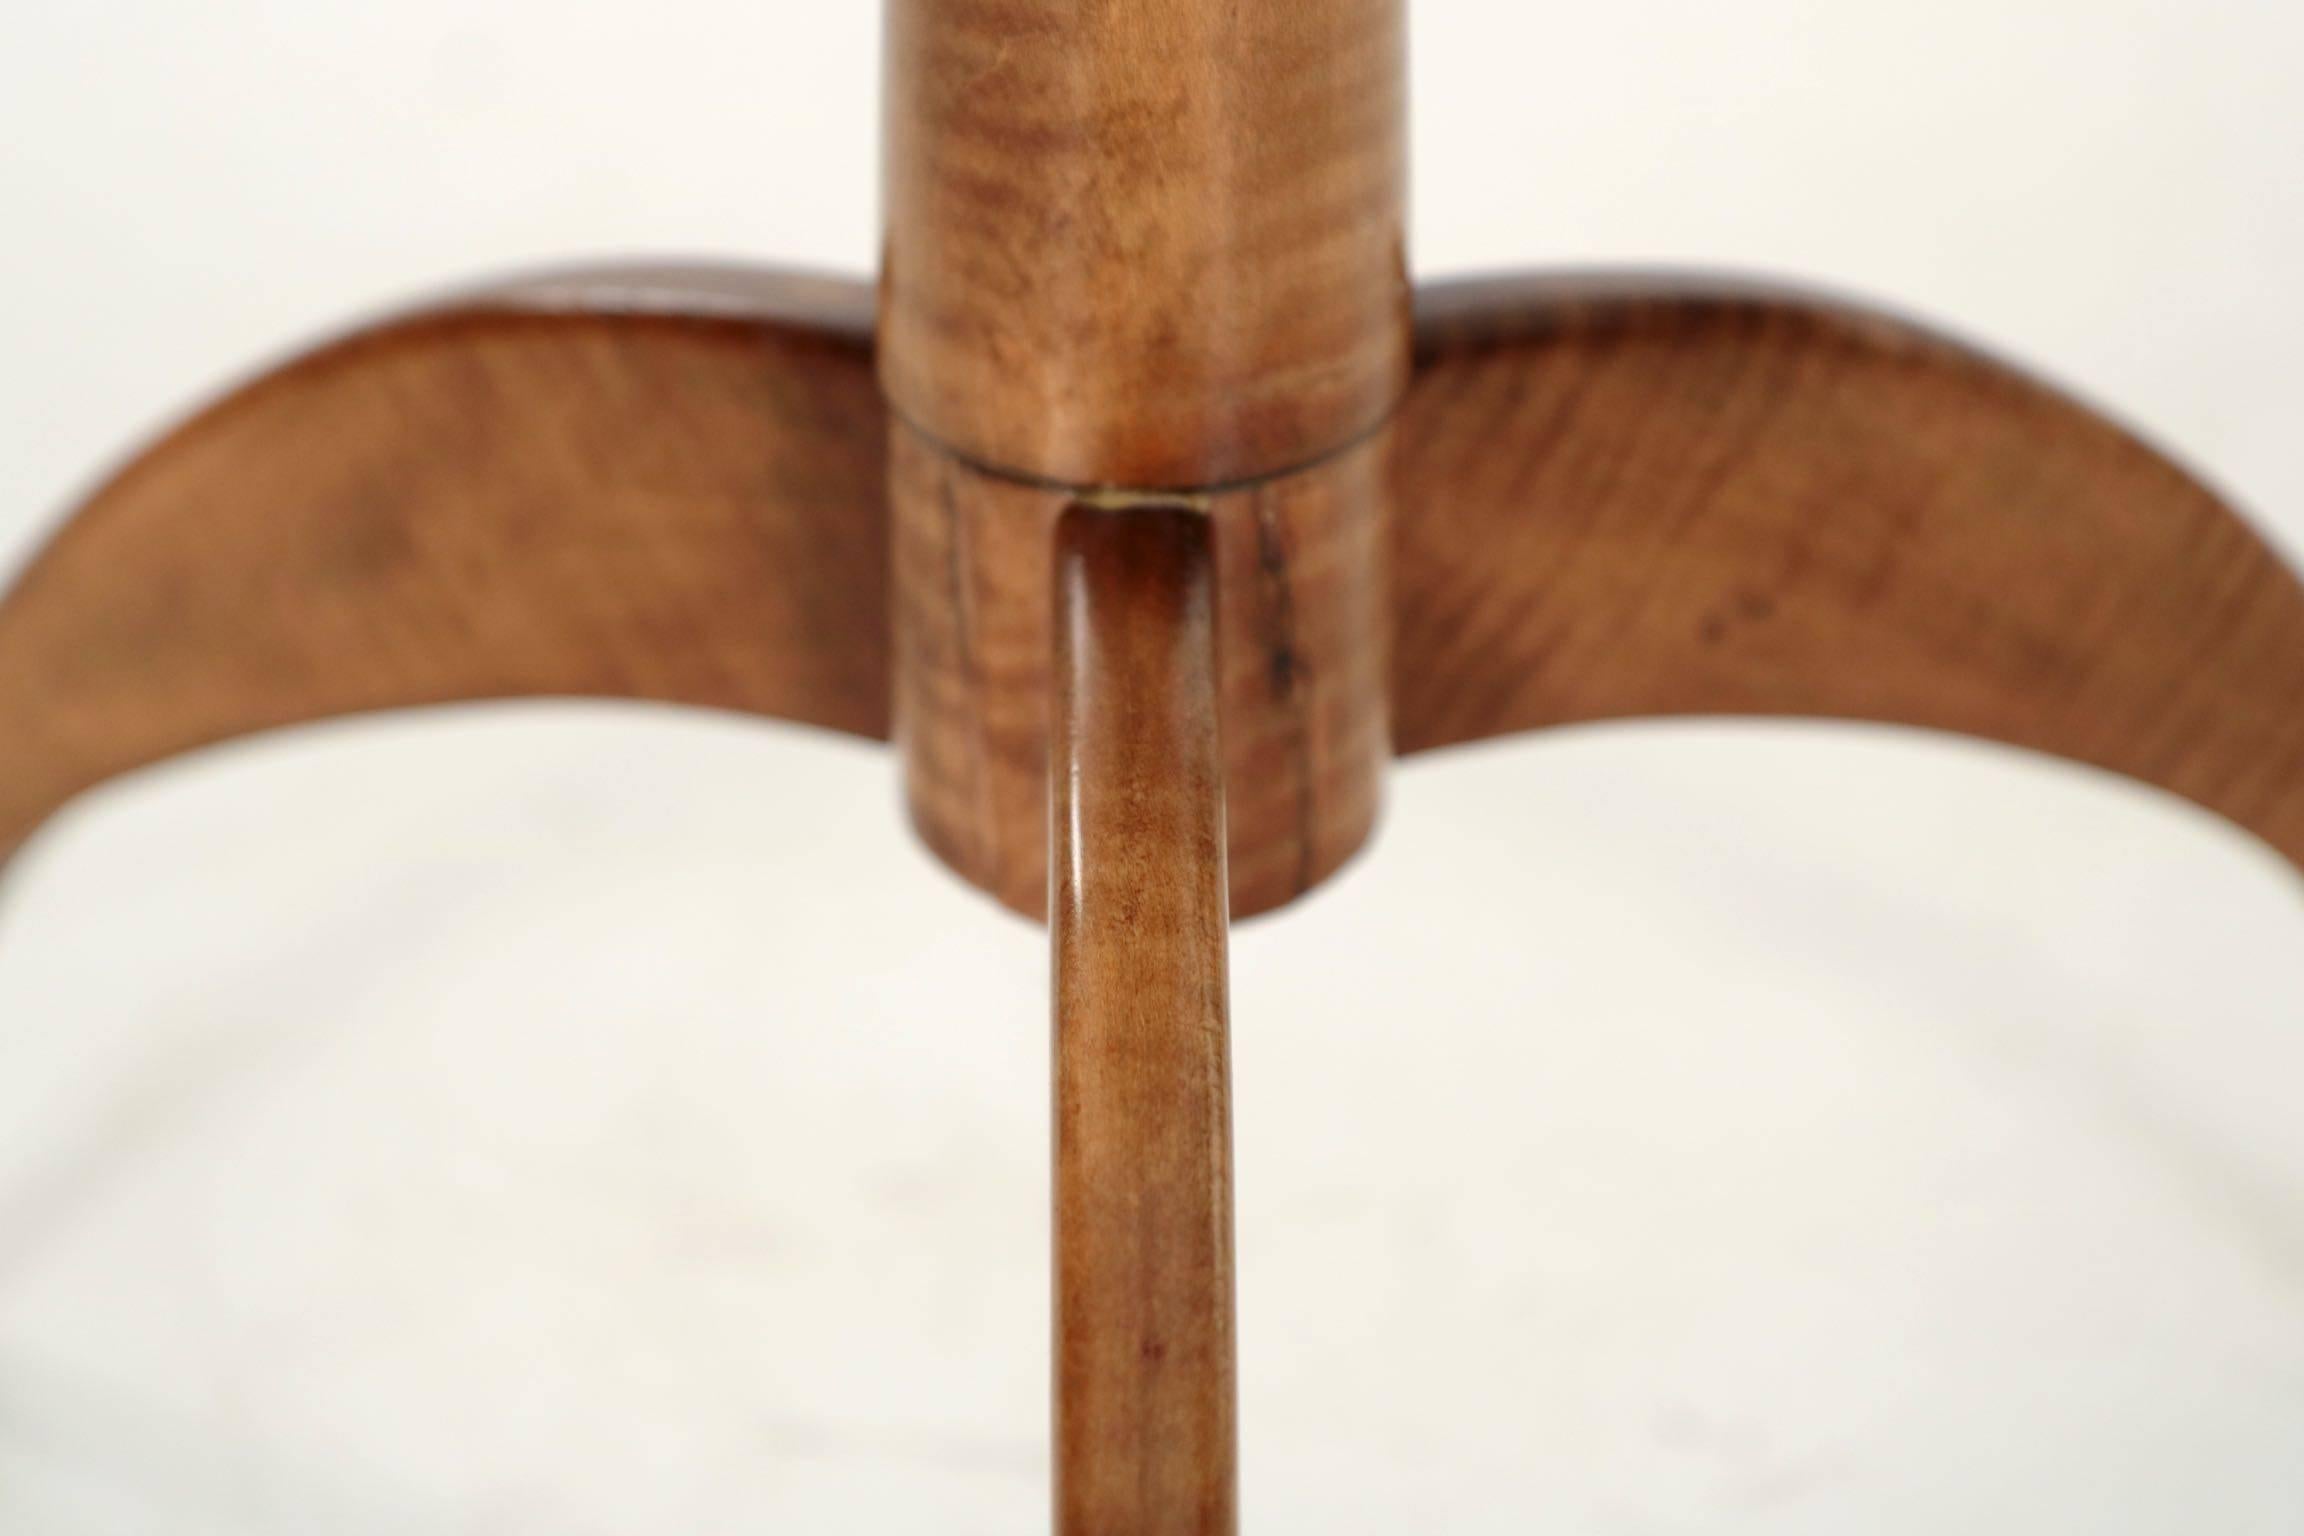 This very sleek and finely crafted solid cherry candle stand is austere and designed with simple effective lines. The round top is chamfered around the edges to lighten the visual weight of the top, allowing the thin edge to float over the tapered